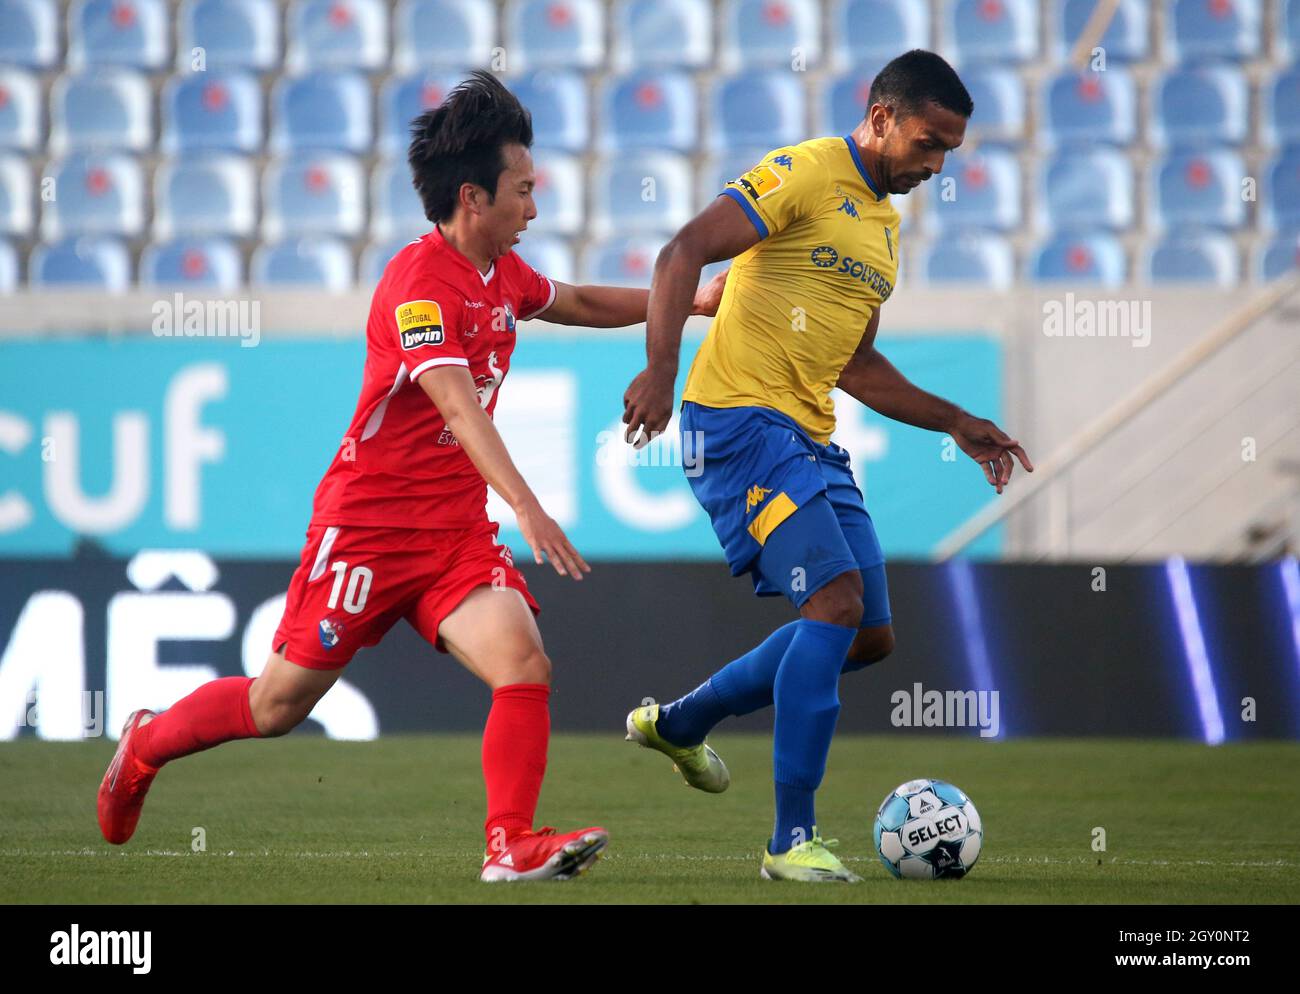 ESTORIL, PORTUGAL - OCTOBER 03: Kanya Fujimoto of Gil Vicente FC competes  for the ball with Lucas Áfrico of GD Estoril Praia ,during the Liga  Portugal Bwin match between GD Estoril Praia